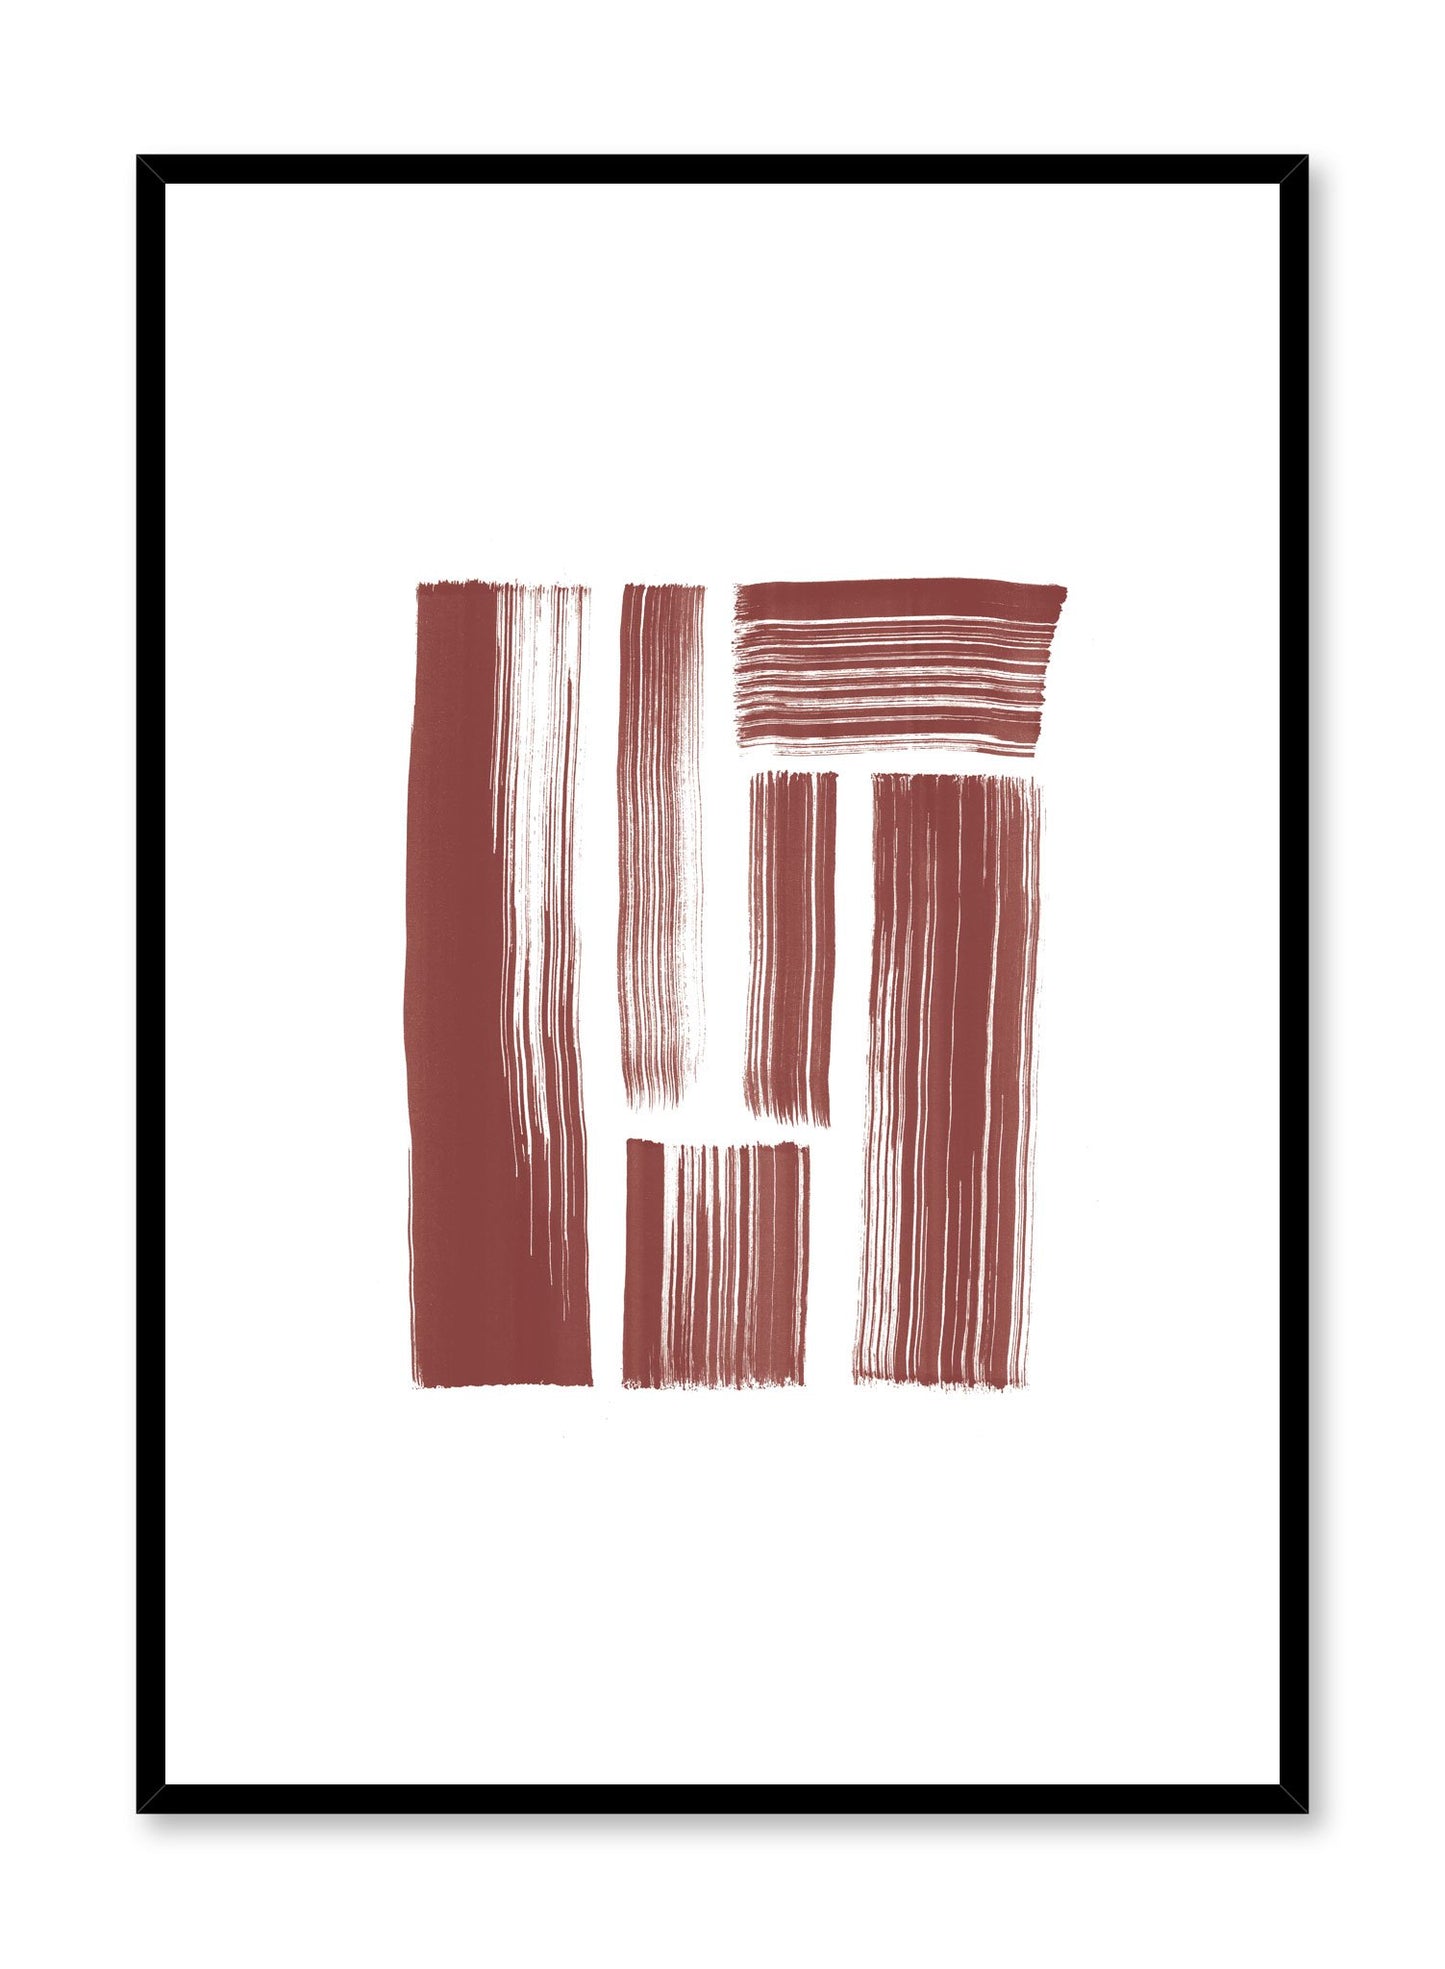 Modern minimalist poster by Opposite Wall with red brushstroke design